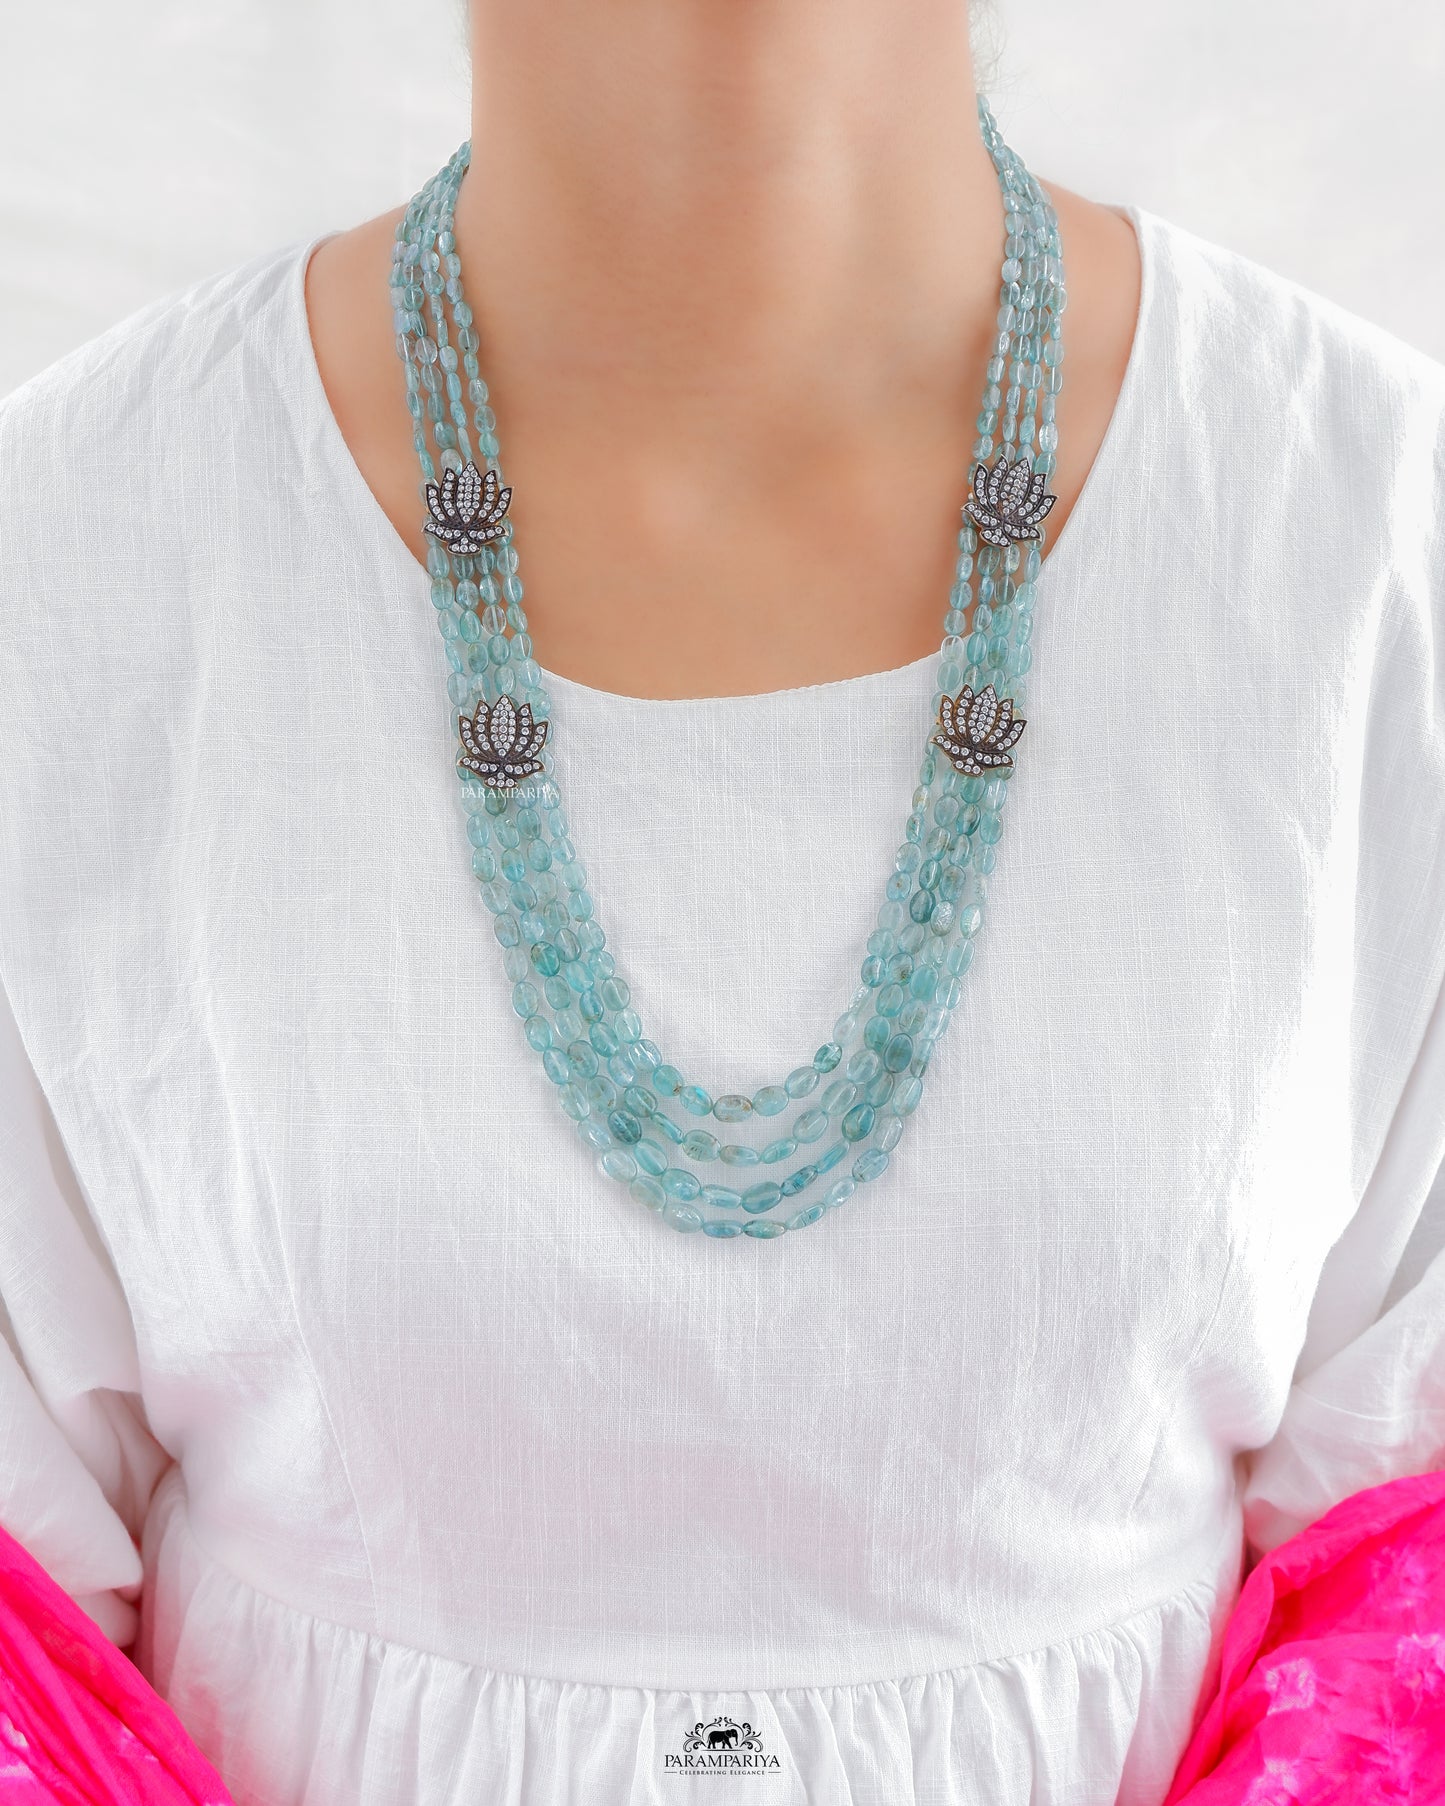 Aquamarine beads necklace adorned with silver zircon lotus motifs.